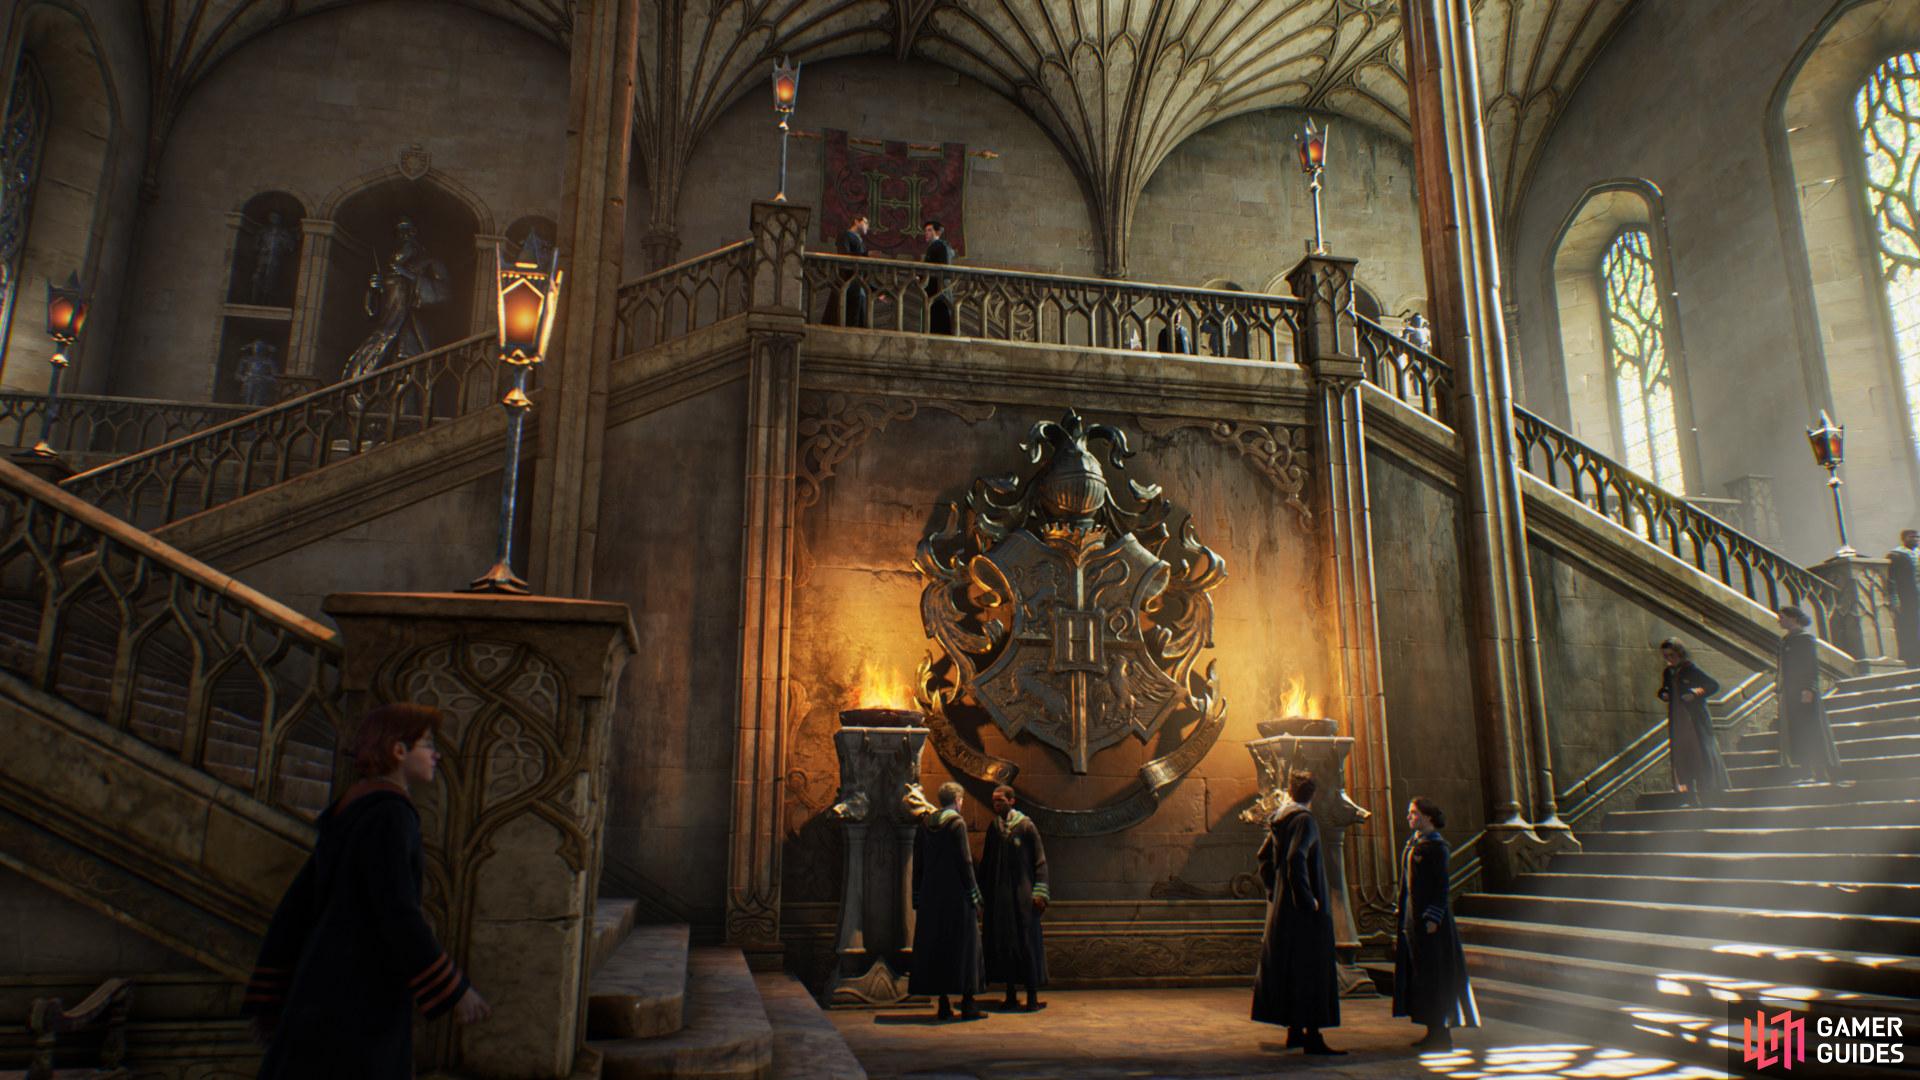 PC players are going to arrive late to Hogwarts. Image via Warner Brothers.